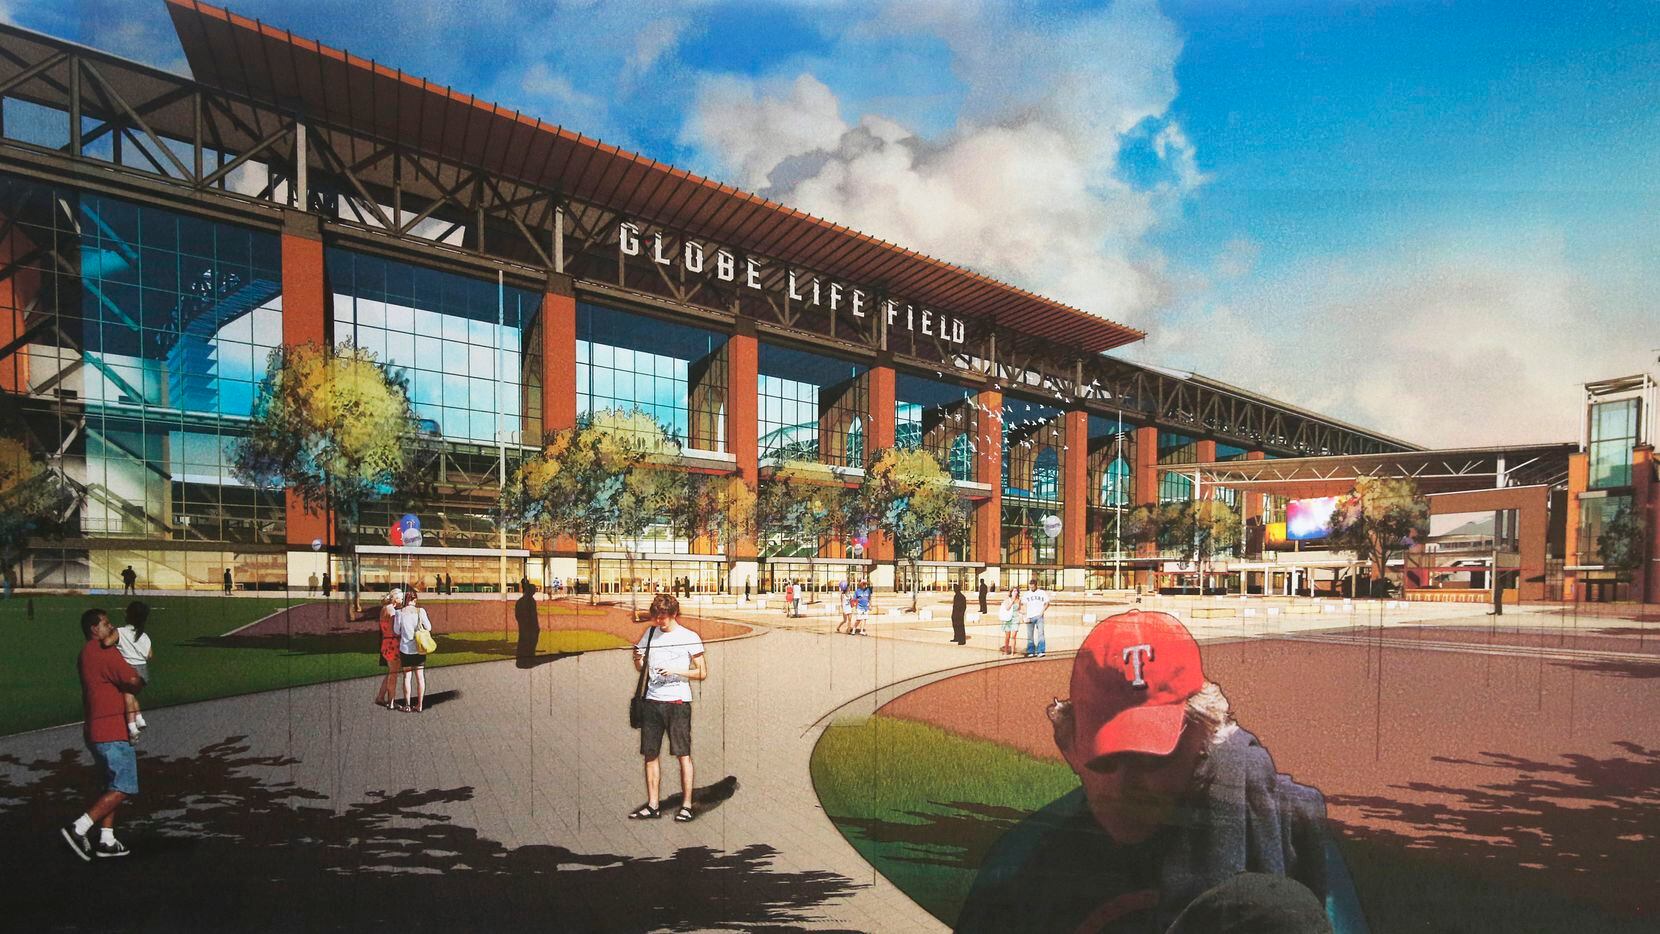 Latest Renderings of the New Globe Life Field – NBC 5 Dallas-Fort Worth